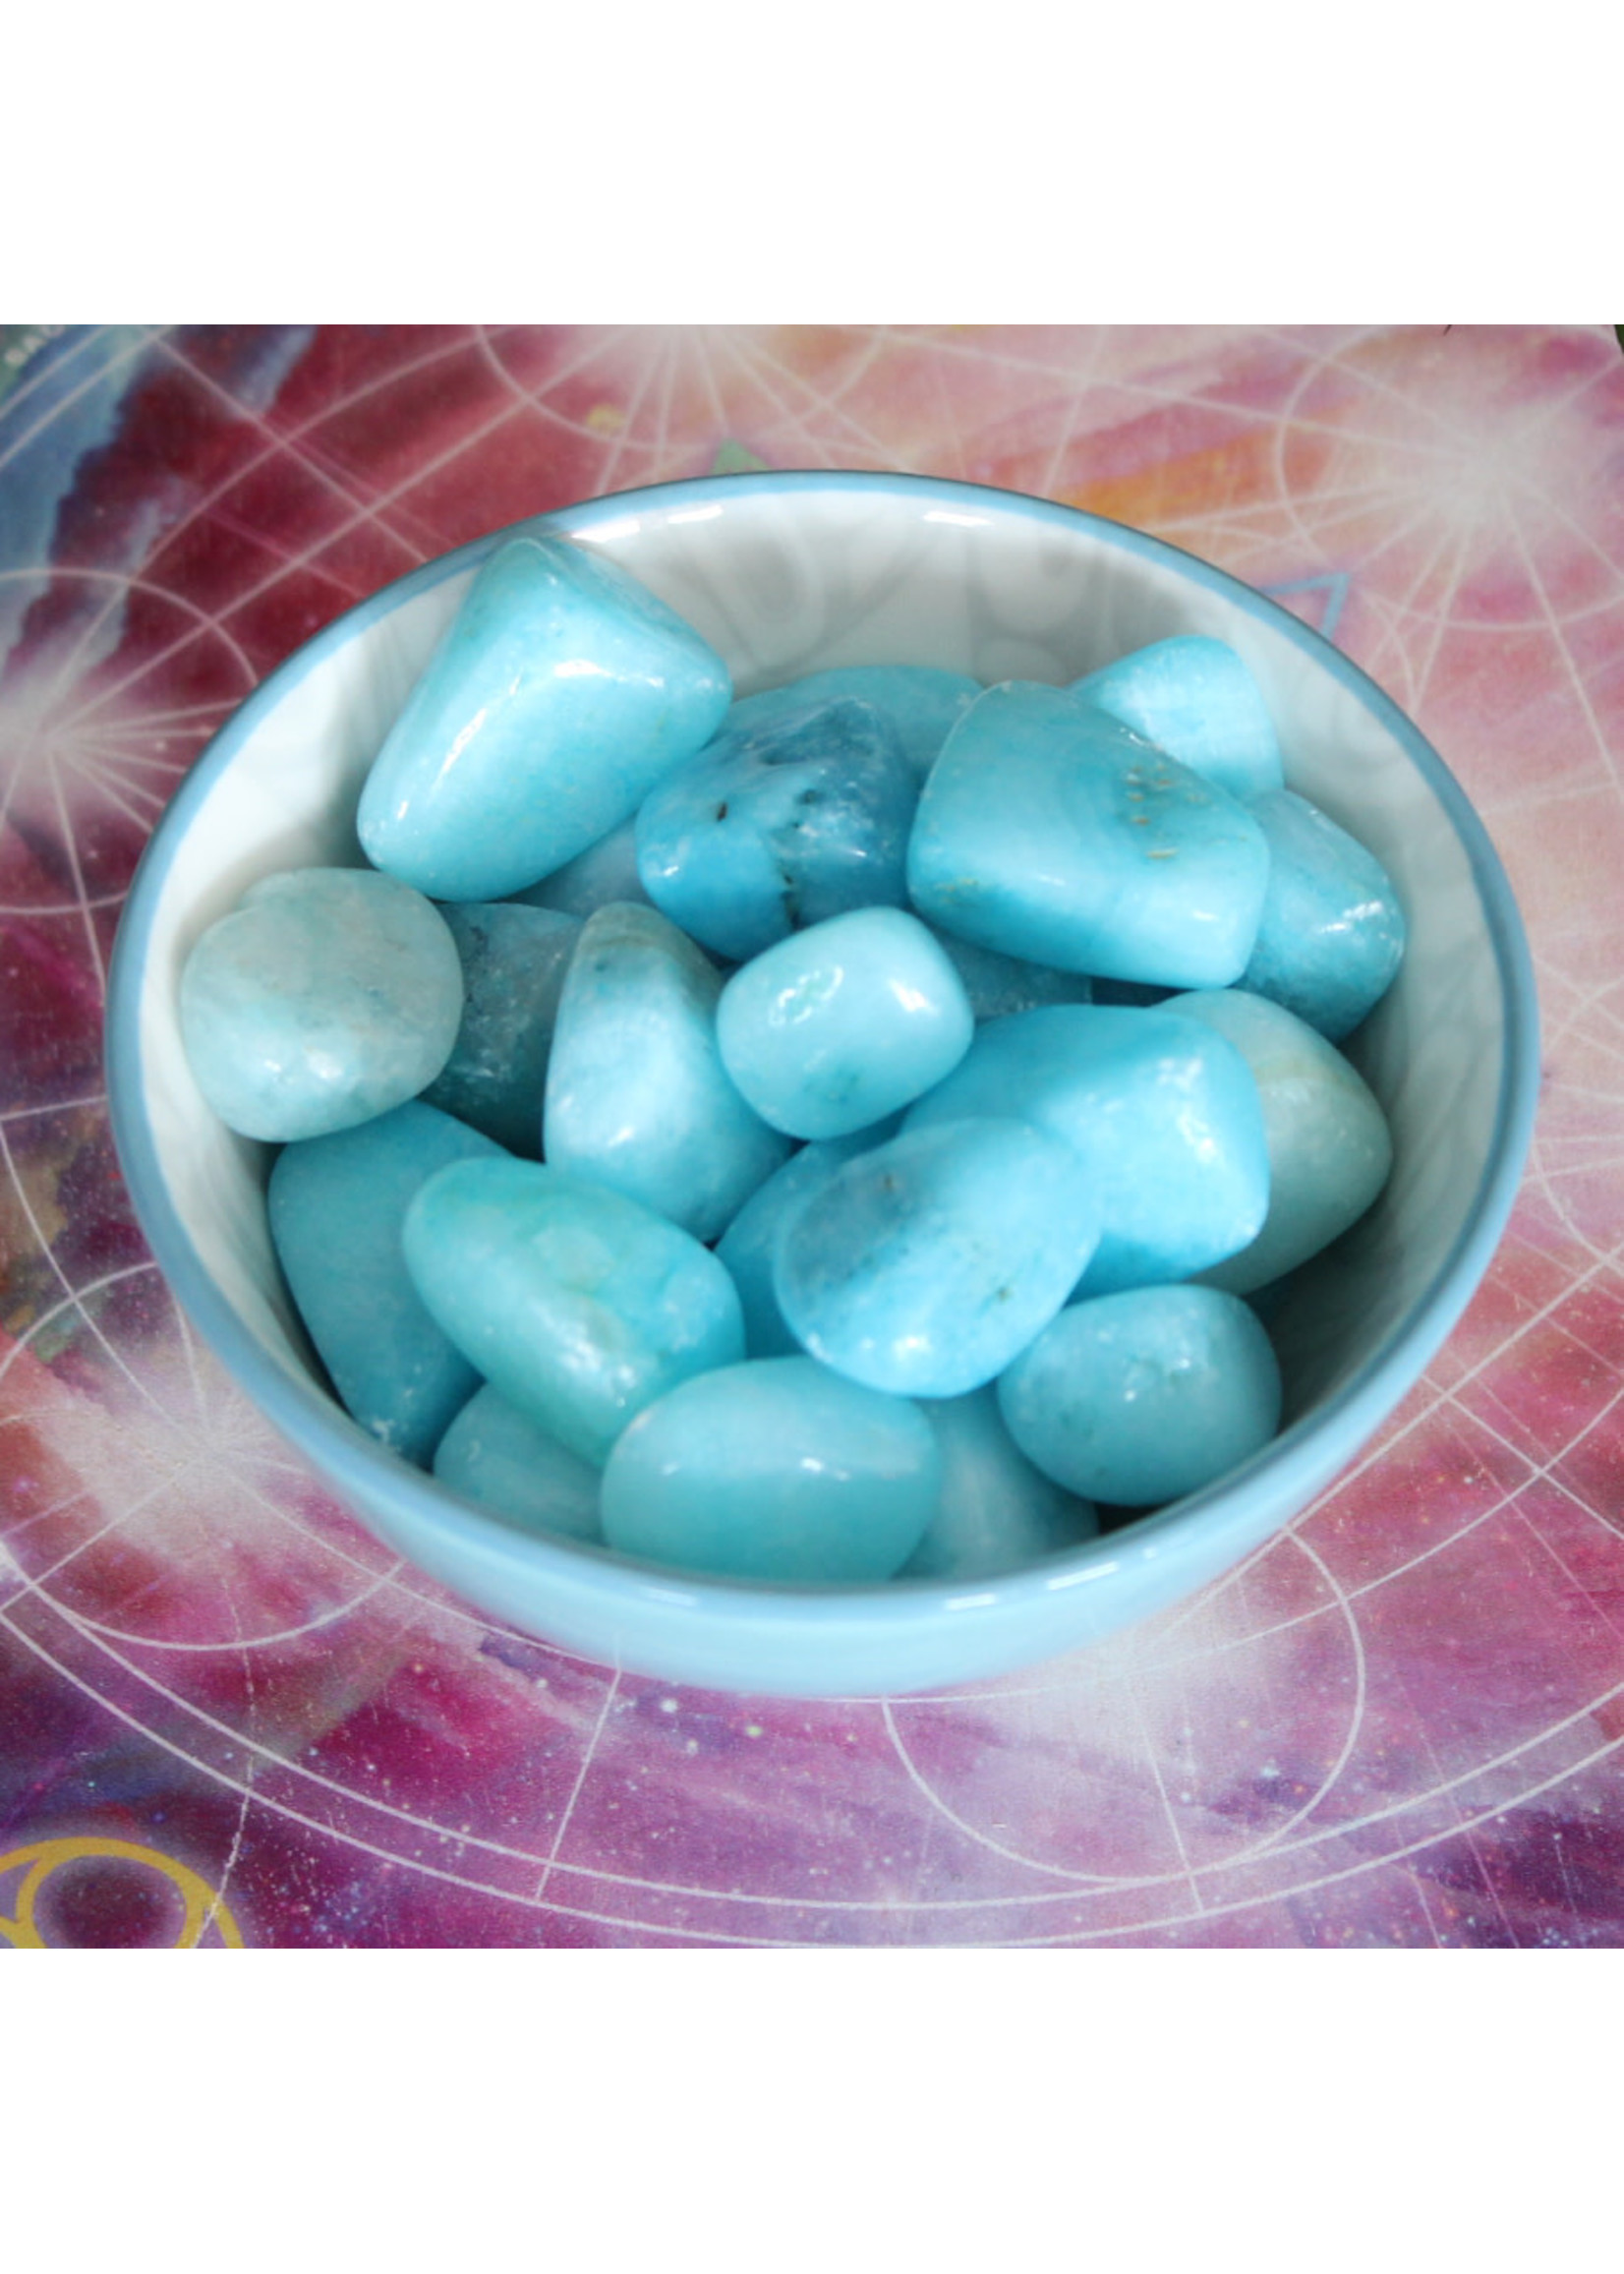 Blue Aragonite Polished for compassion and empathy